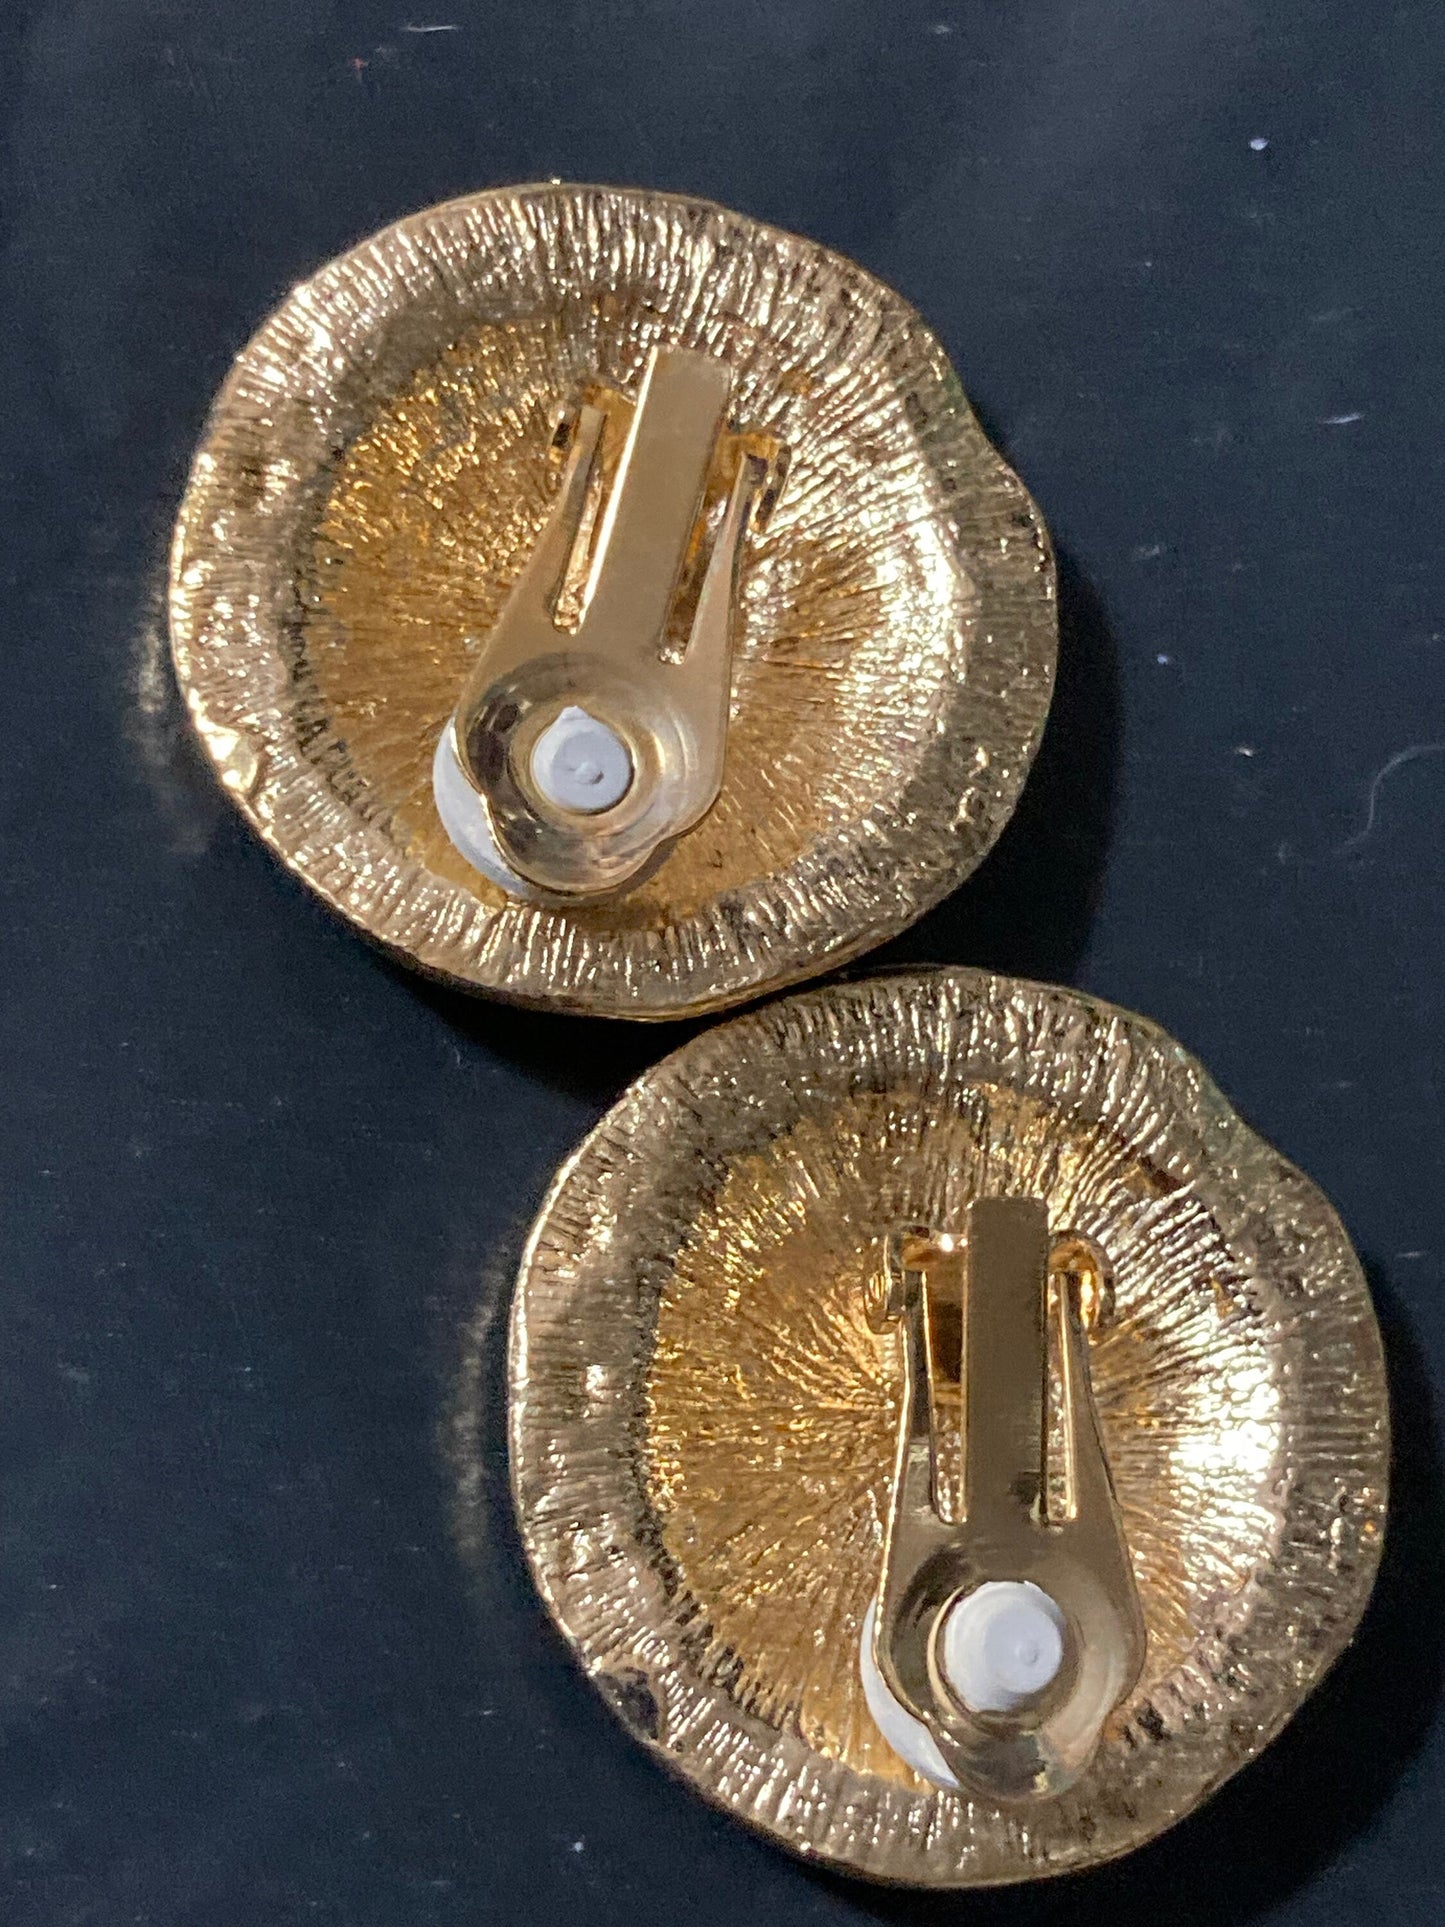 True vintage pristine oversized gold plated metal 3.4cm round disc button earrings genuine period old shop stock